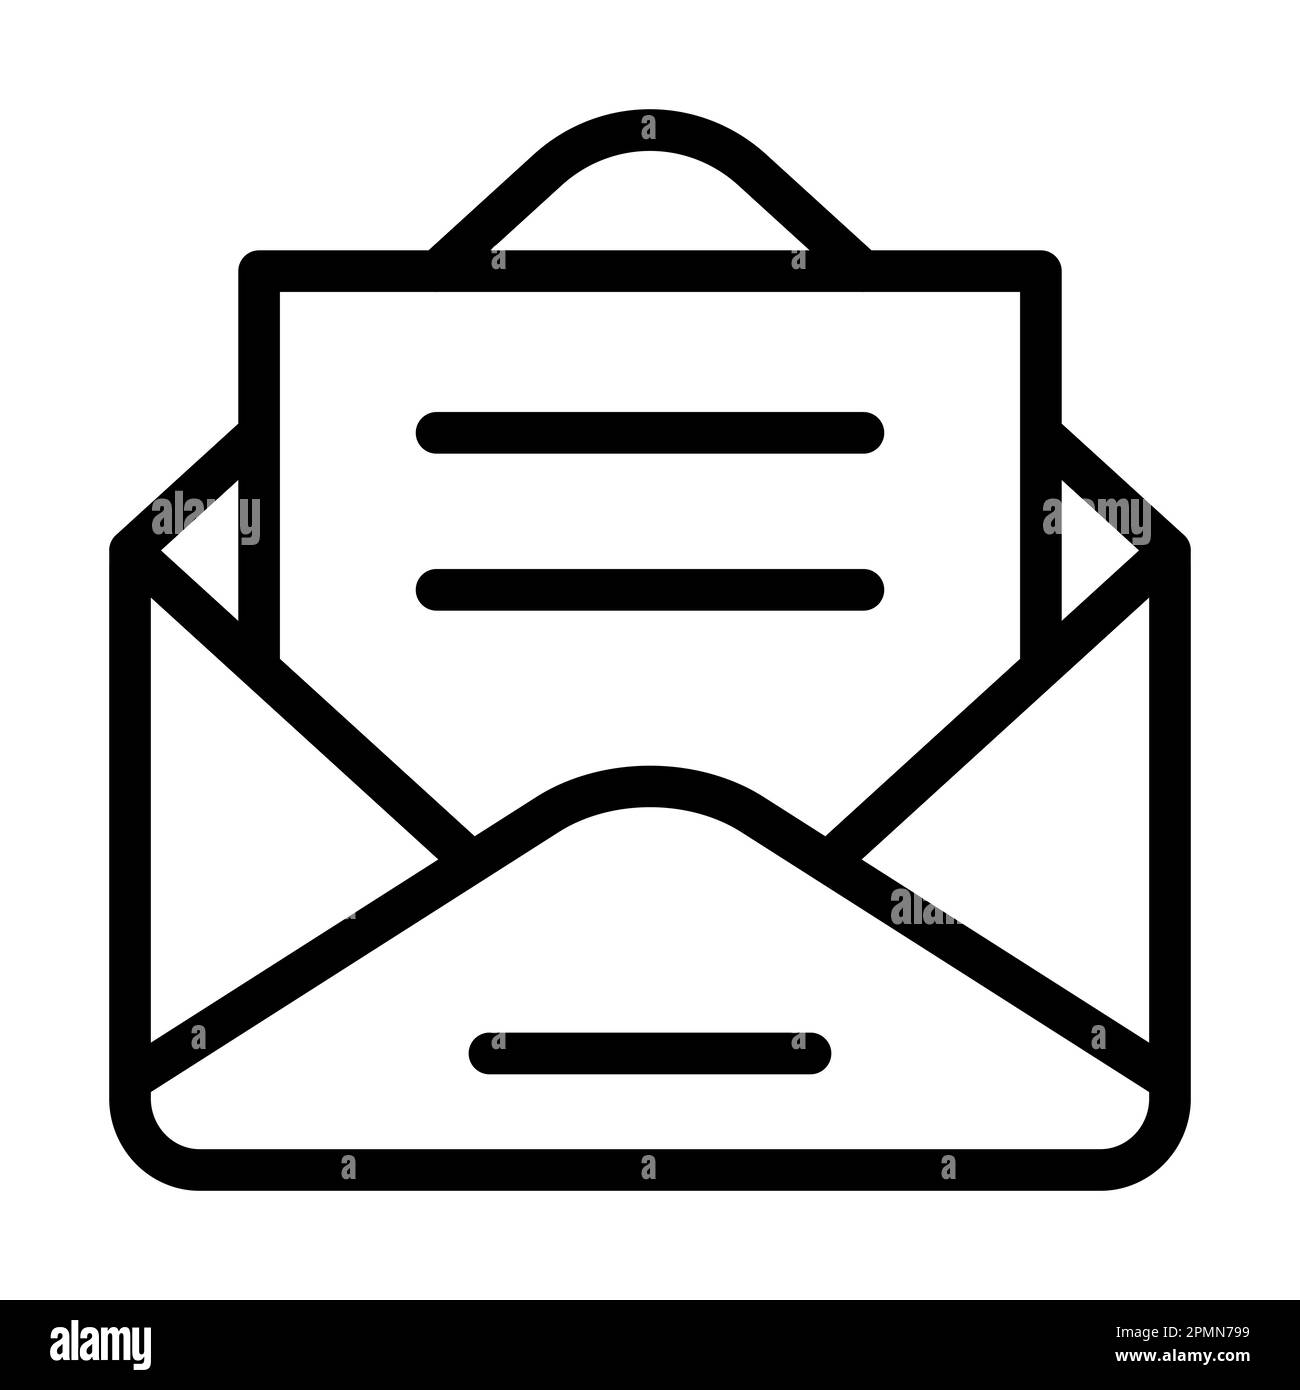 Mailing Vector Thick Line Icon For Personal And Commercial Use. Stock Photo